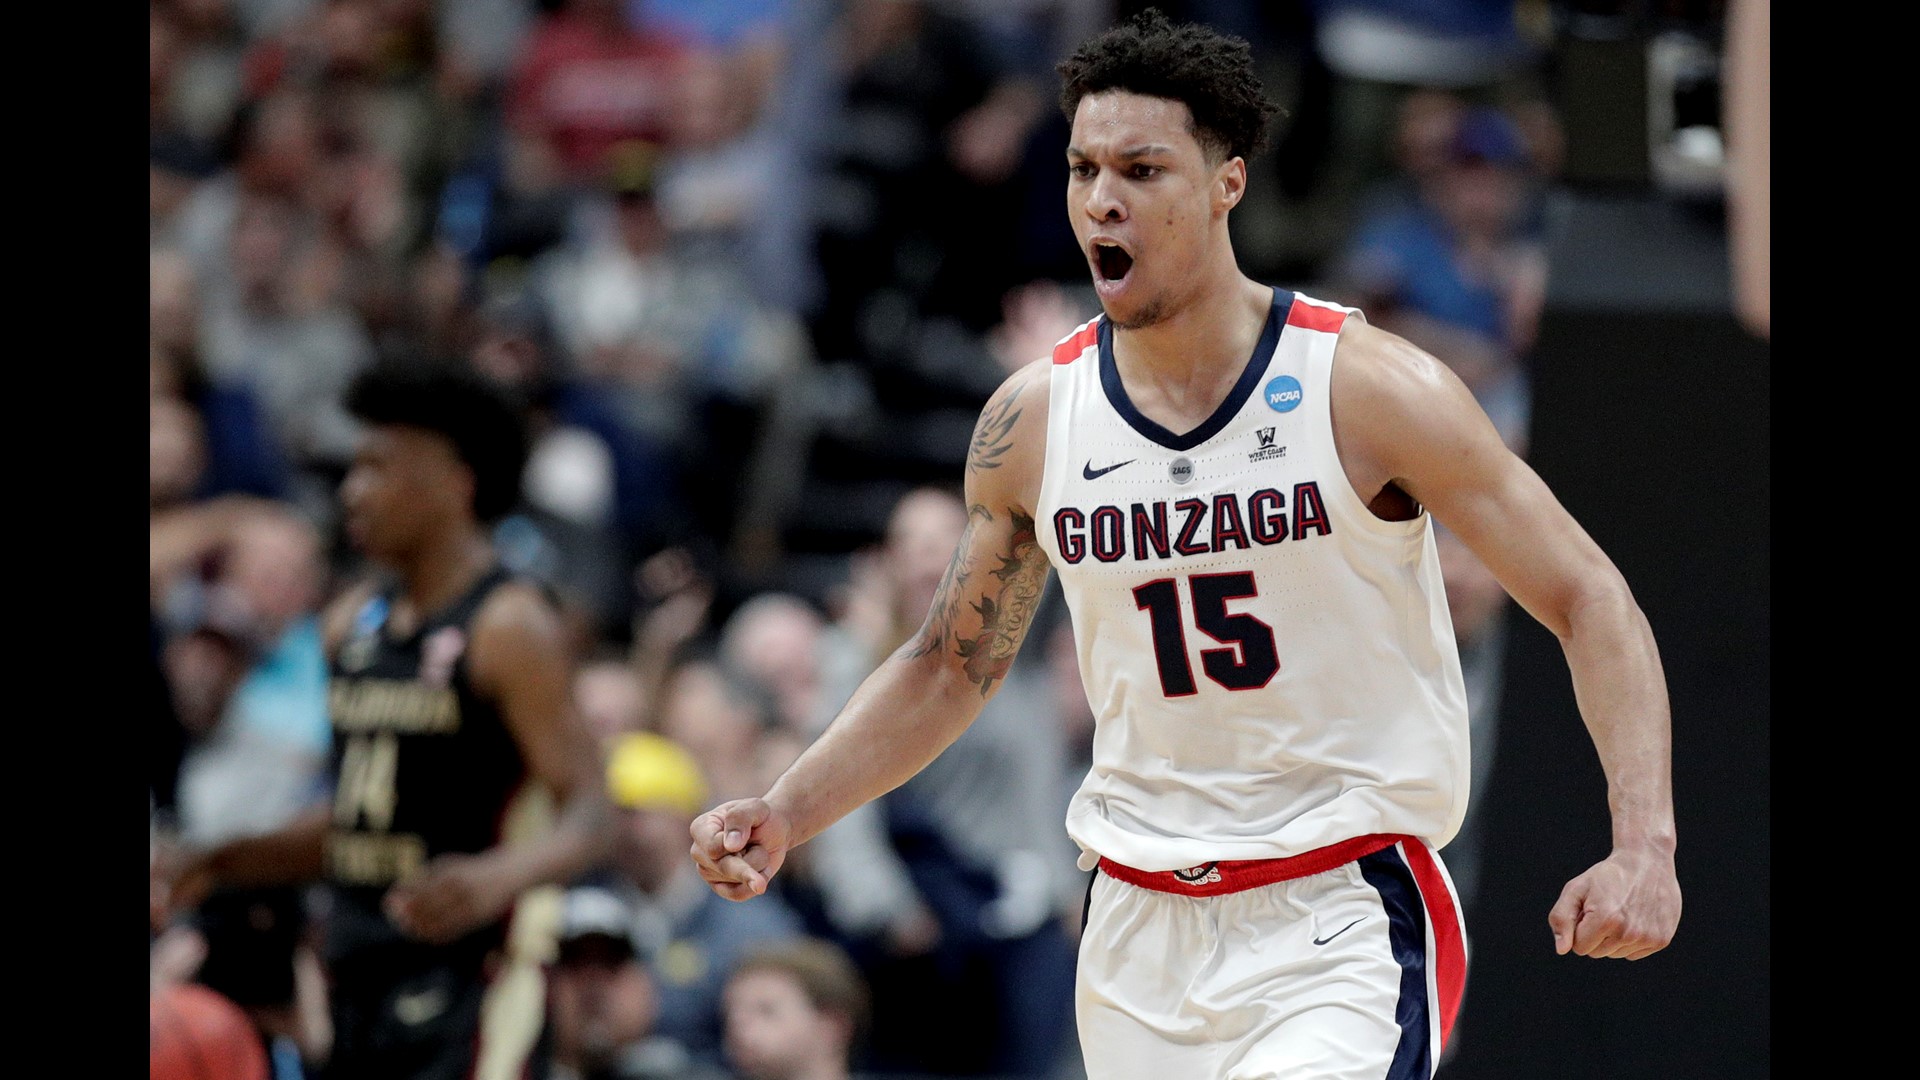 Both former Zags stars were invited to attend the NBA Draft on June 20. This likely means both will be taken in the first 20 picks of the draft.